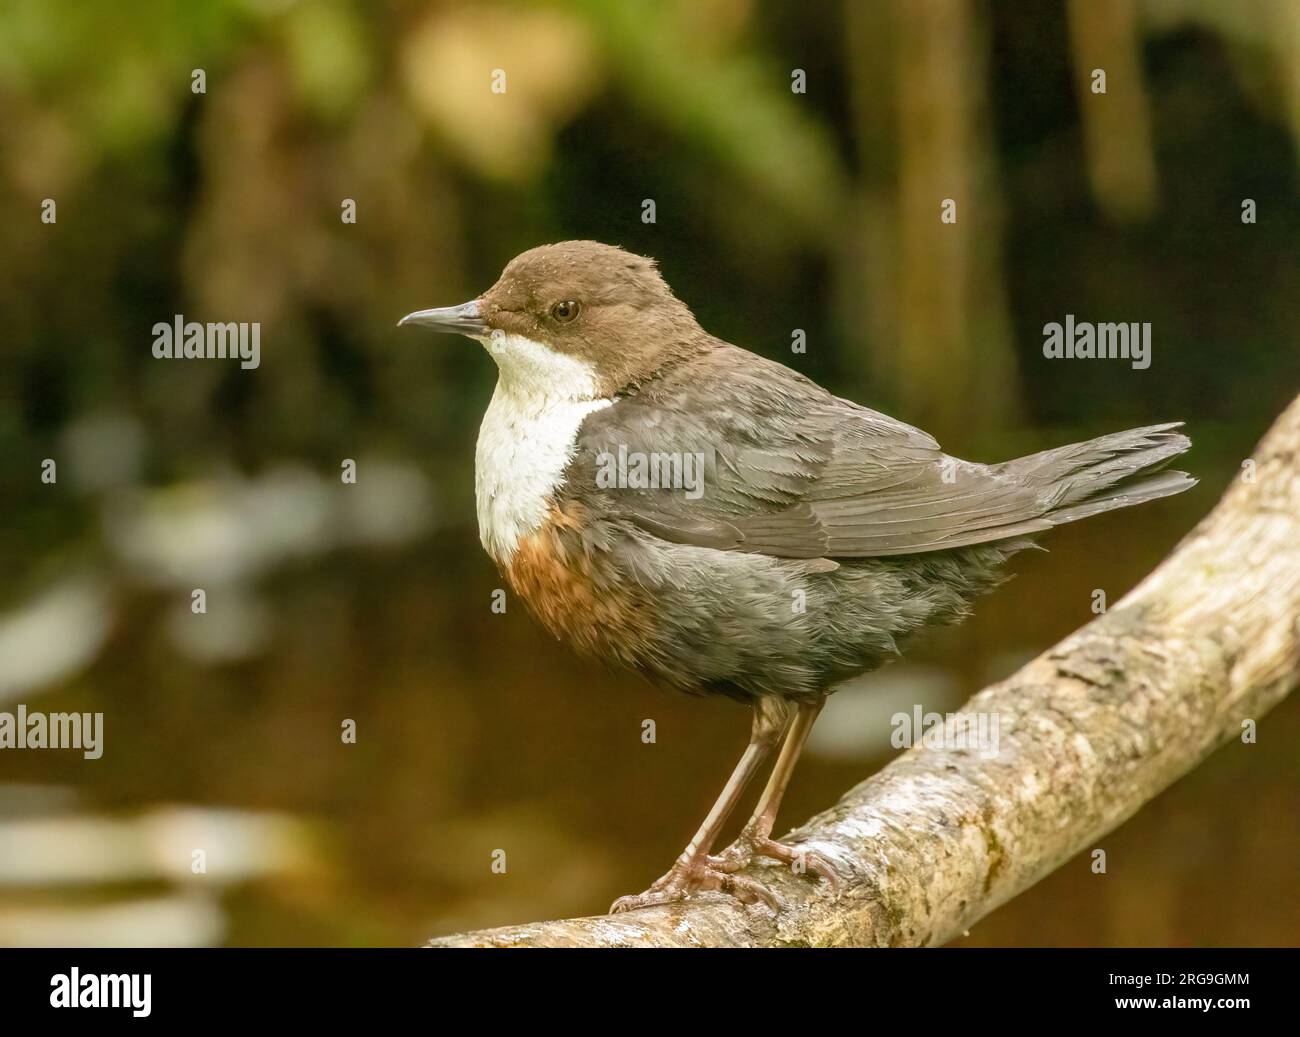 Dipper bird gathering bugs from the river to feed young Stock Photo